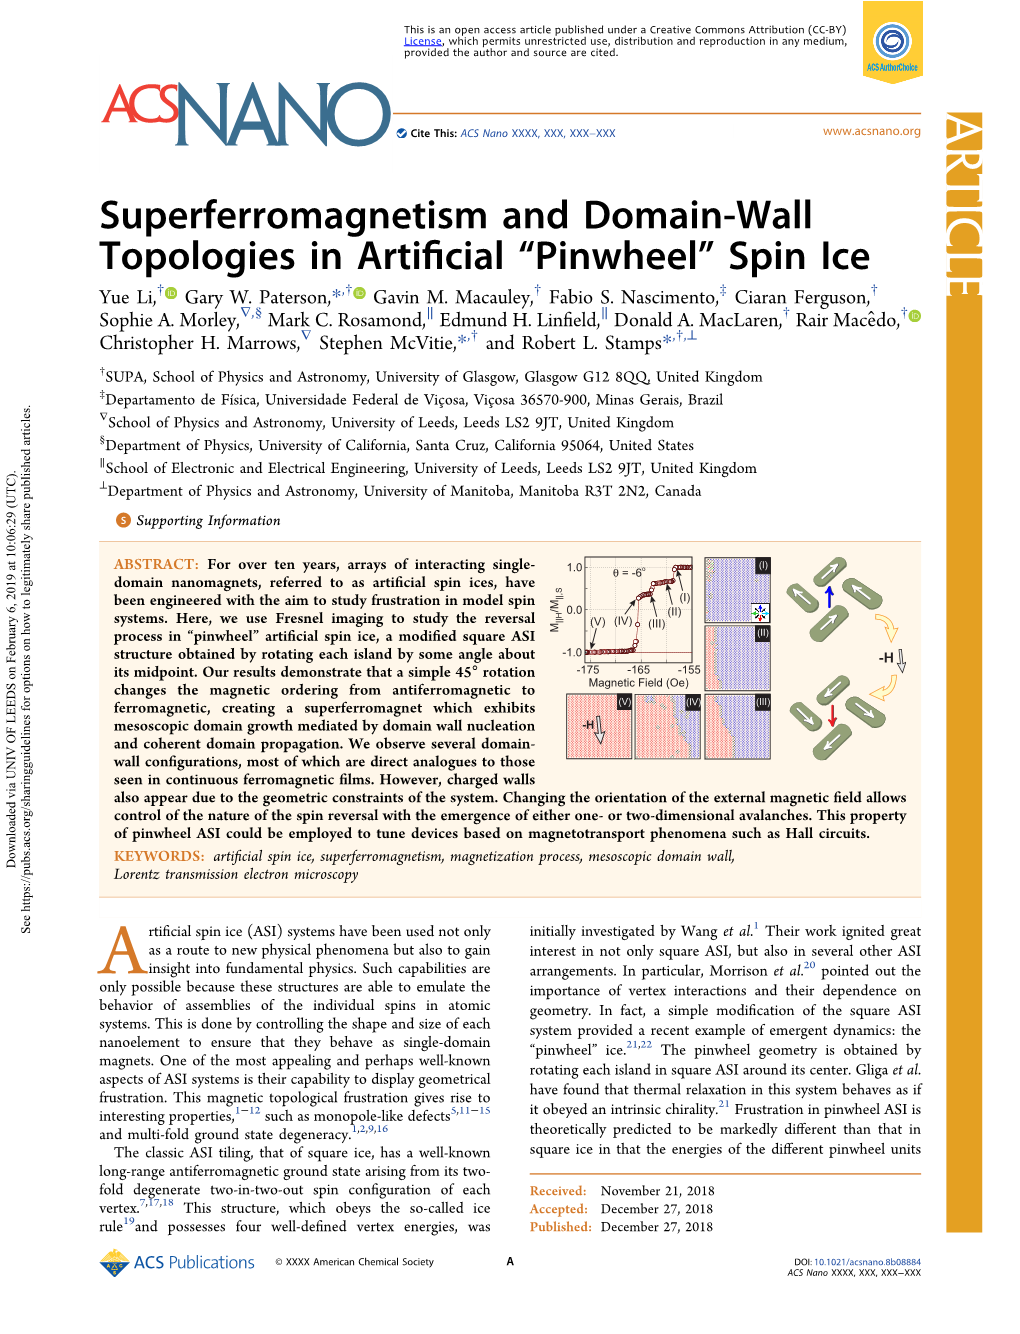 Superferromagnetism and Domain-Wall Topologies in Artificial